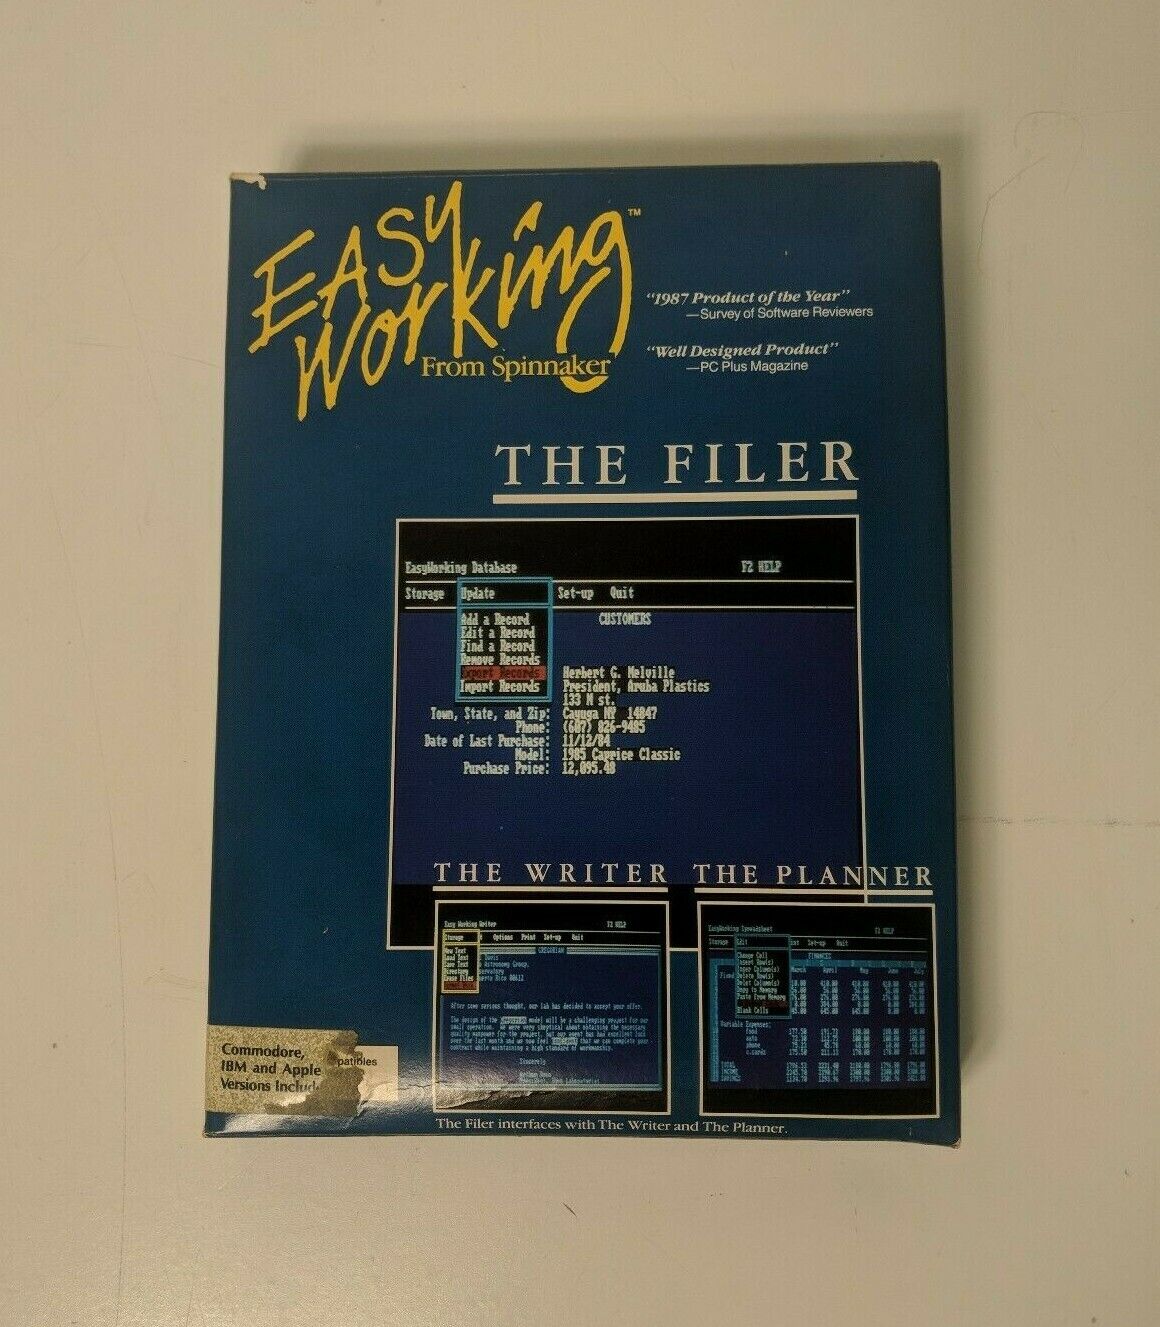 Easy Working From Spinnaker The Filter Commodore 64/128 Apple IBM